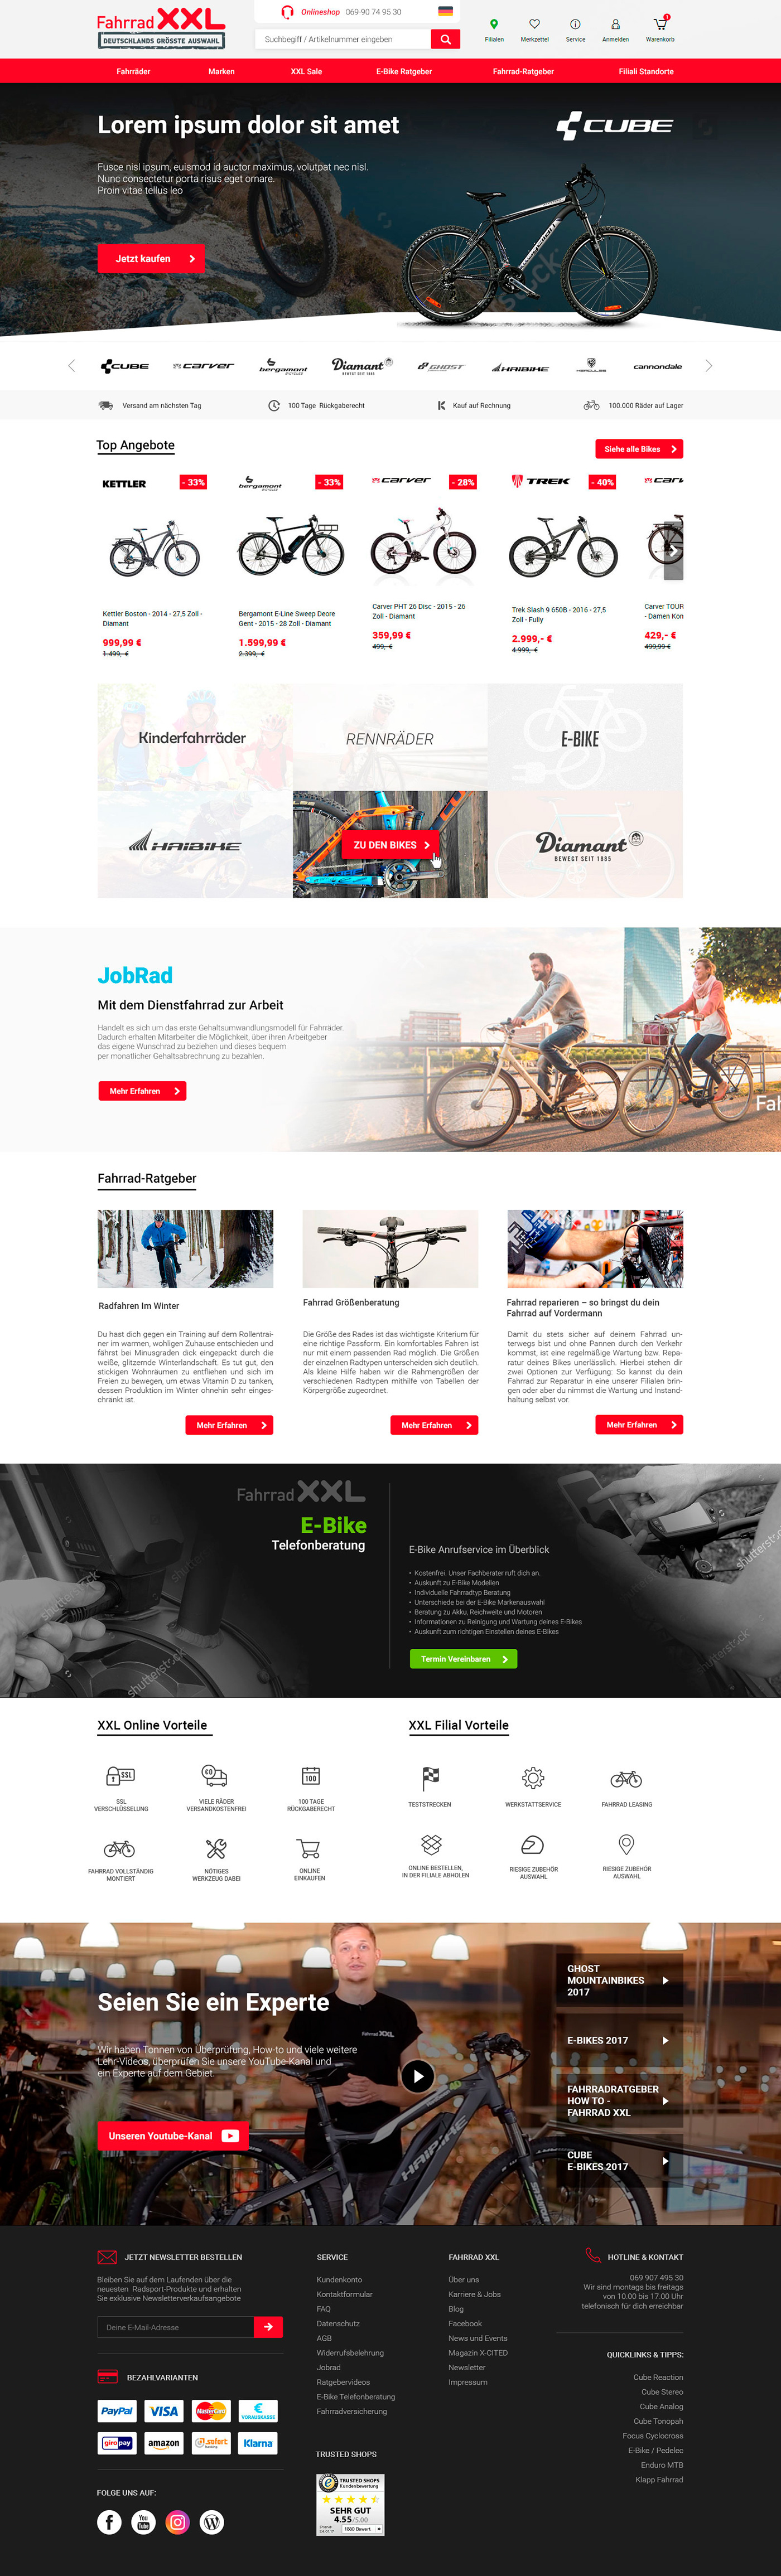 Webdesign UI ux user interface user experience arquitecture information